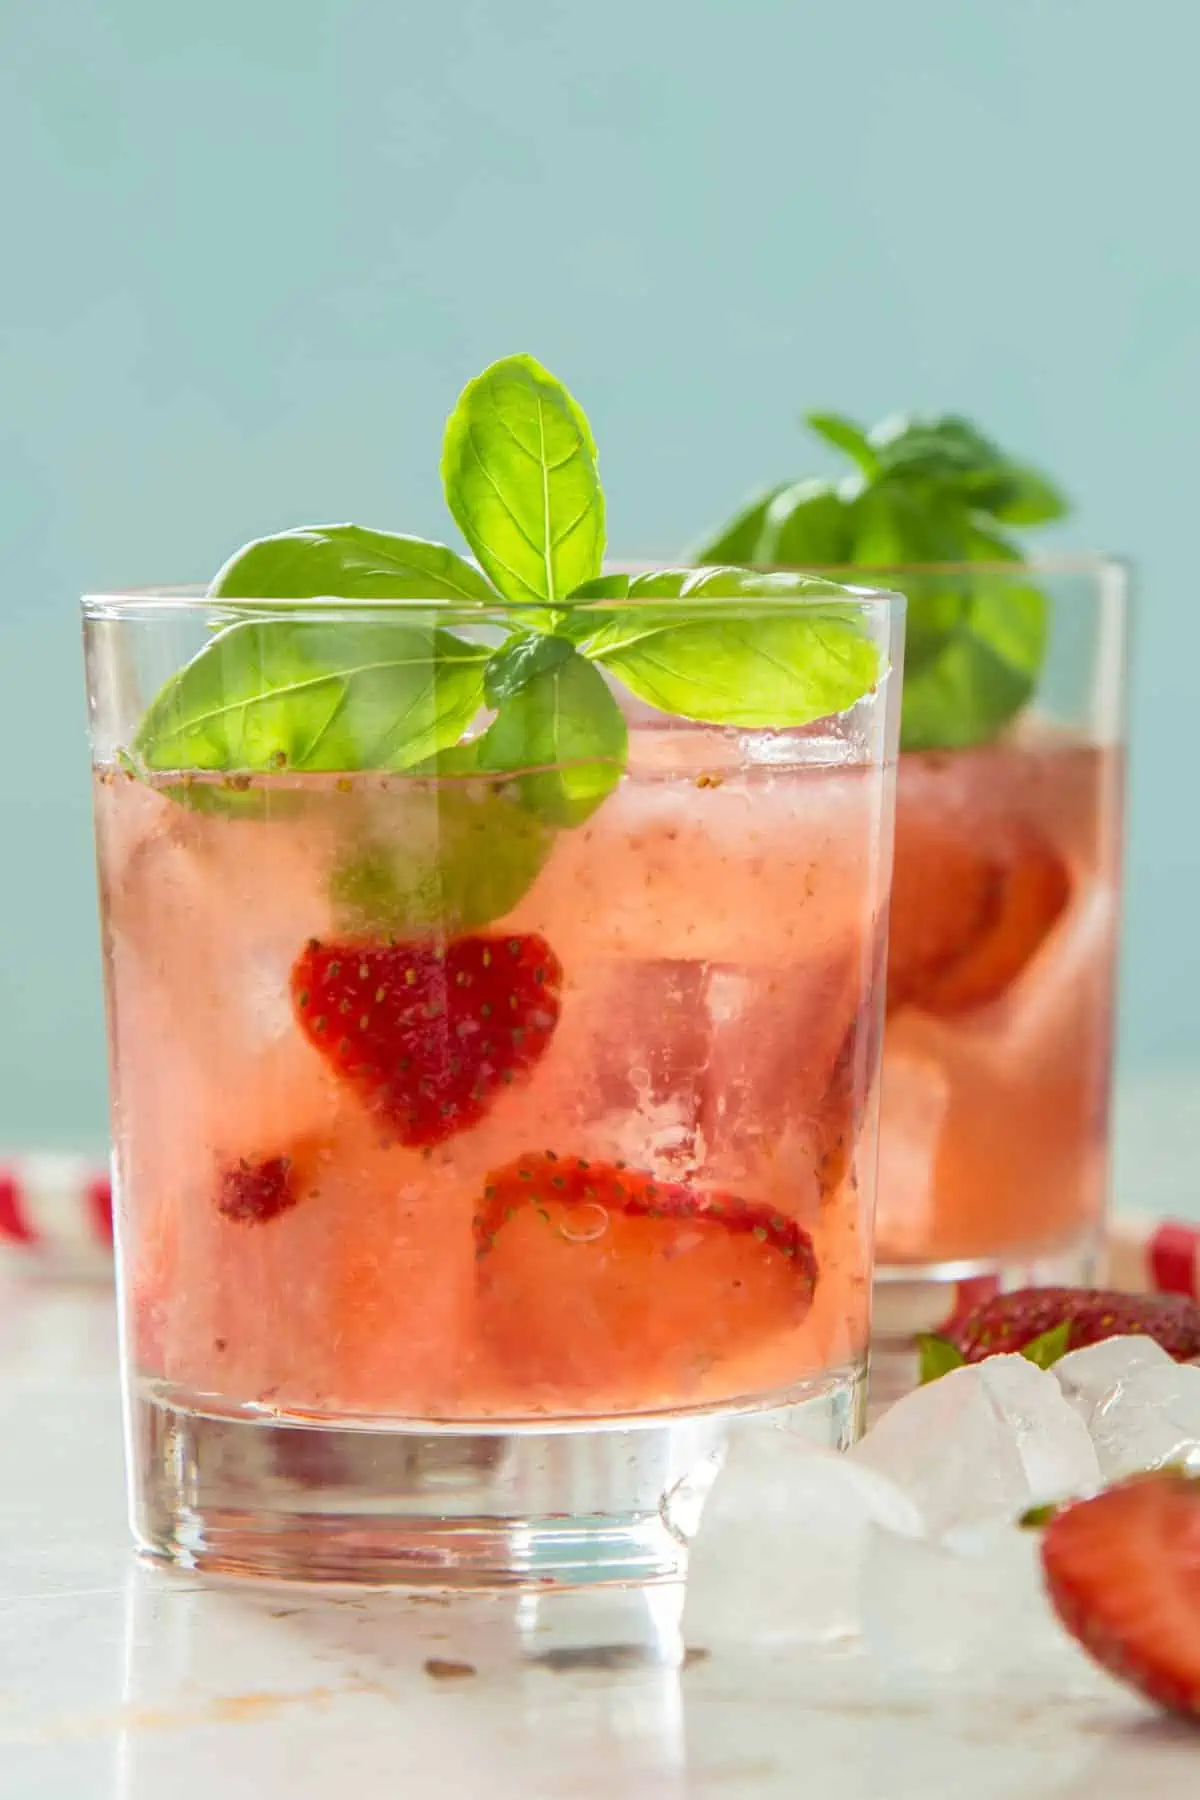 A glass of basil strawberry-infused water.